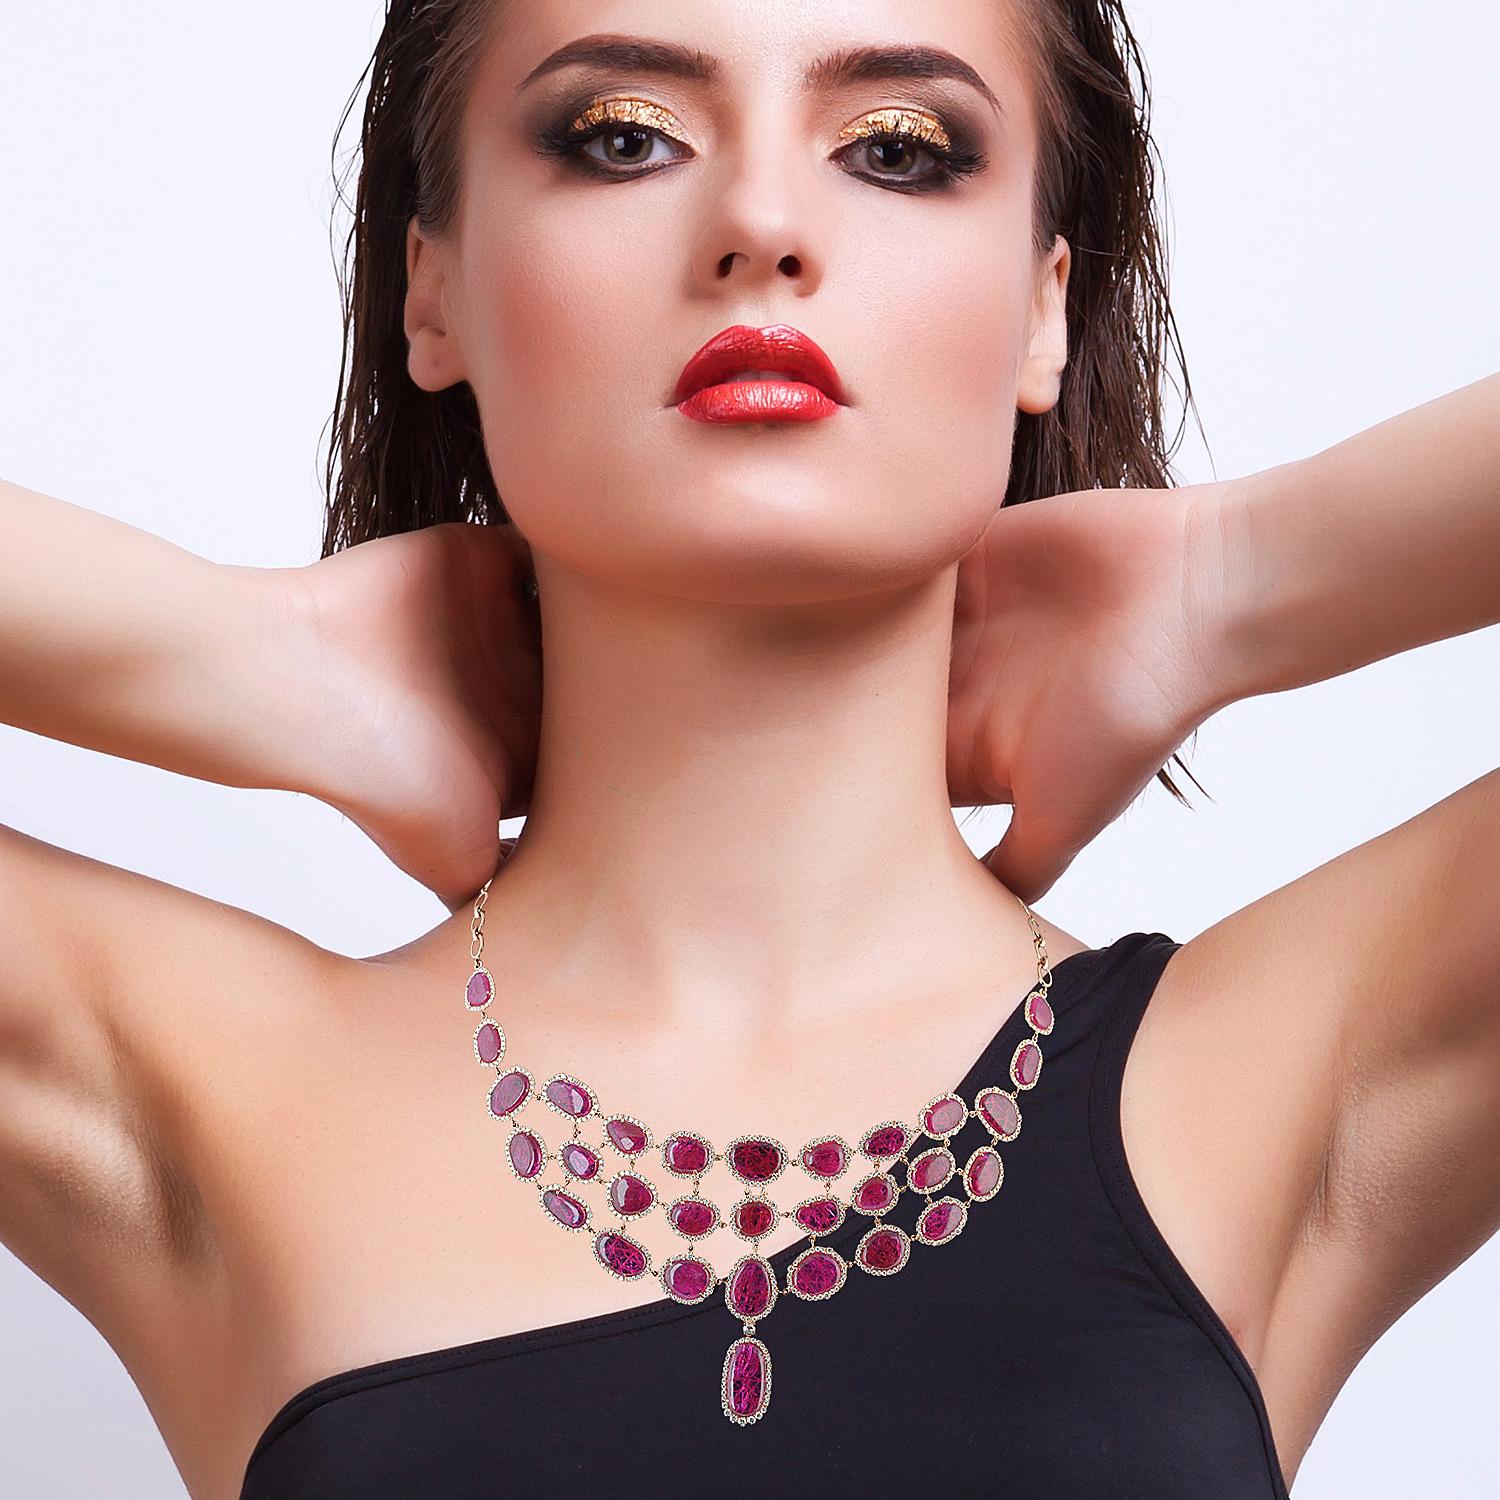 Cast in 14-karat gold, this exquisite necklace is hand set in 59.59 carats of natural rubies and 6.64-carats of glimmering diamonds.  The tiered choker style makes a great statement piece. 

FOLLOW  MEGHNA JEWELS storefront to view the latest